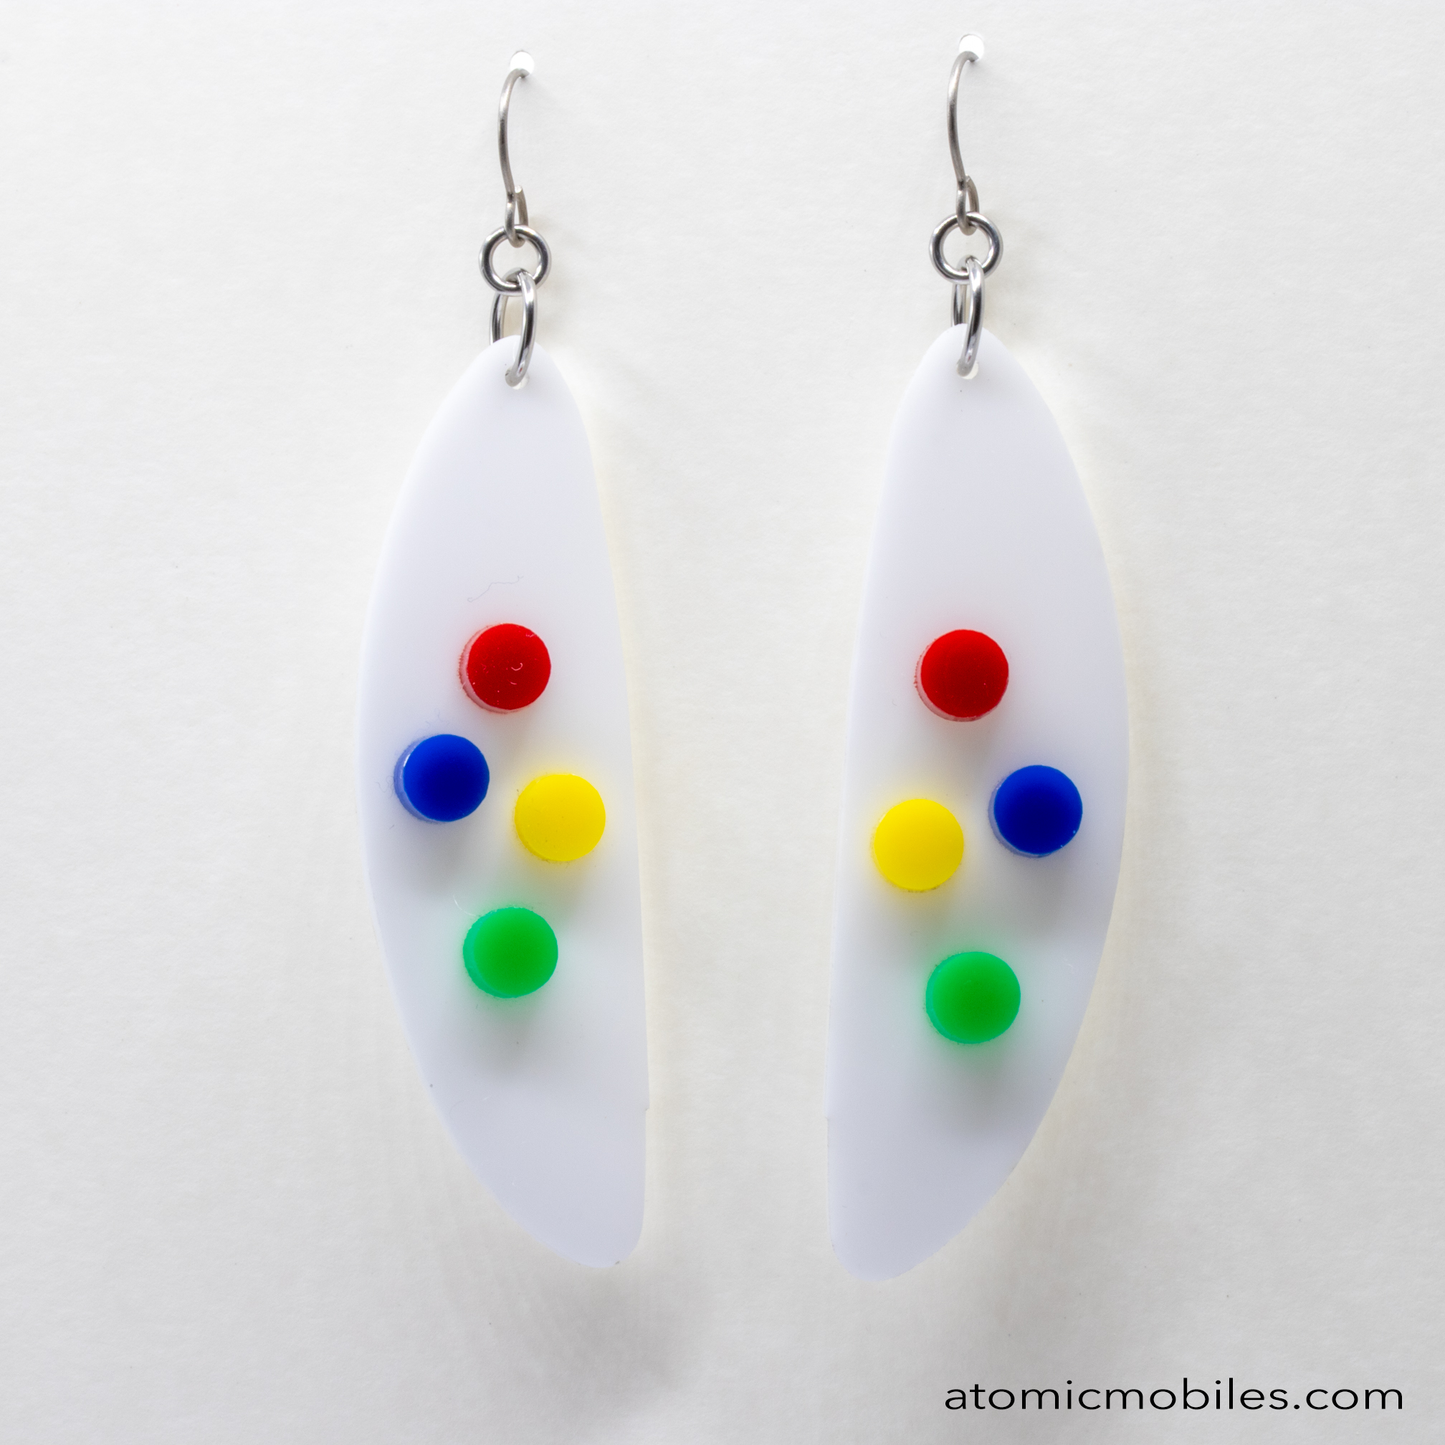 POPdots modern retro statement earrings in White with Multi Color Dots acrylic by AtomicMobiles.com